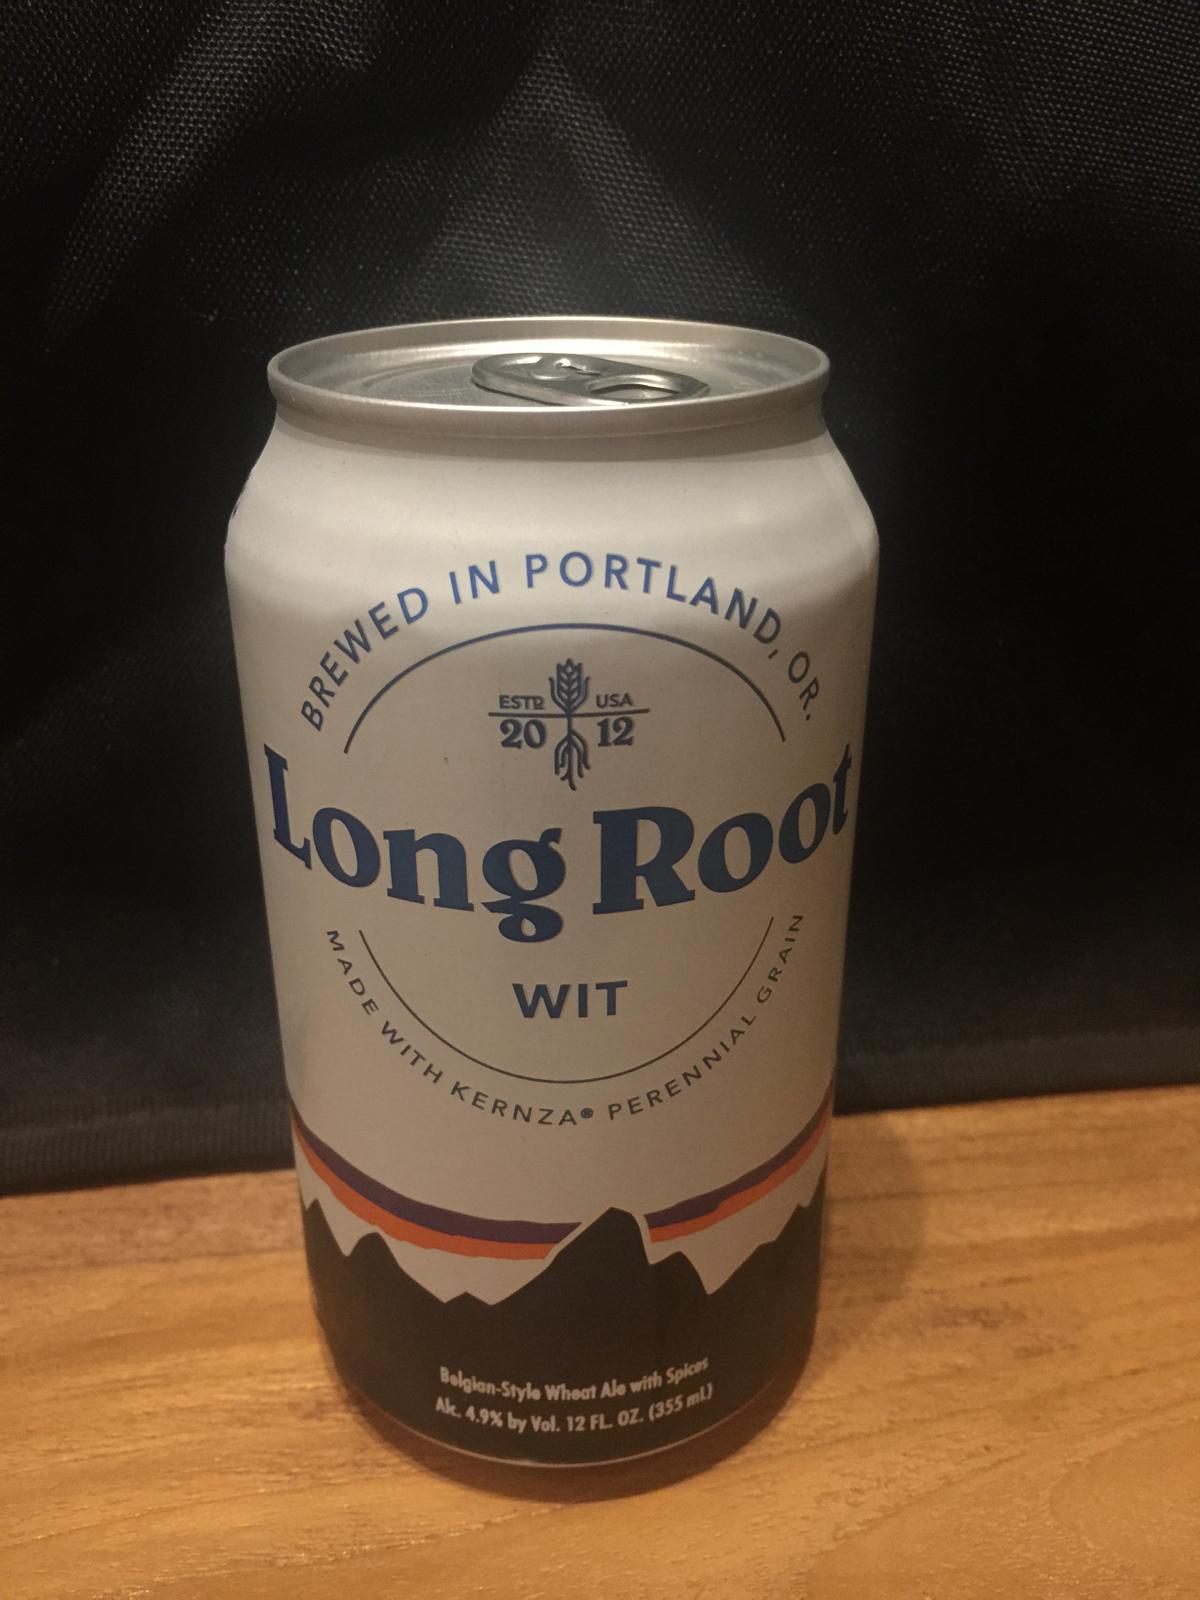 Long Root Wit